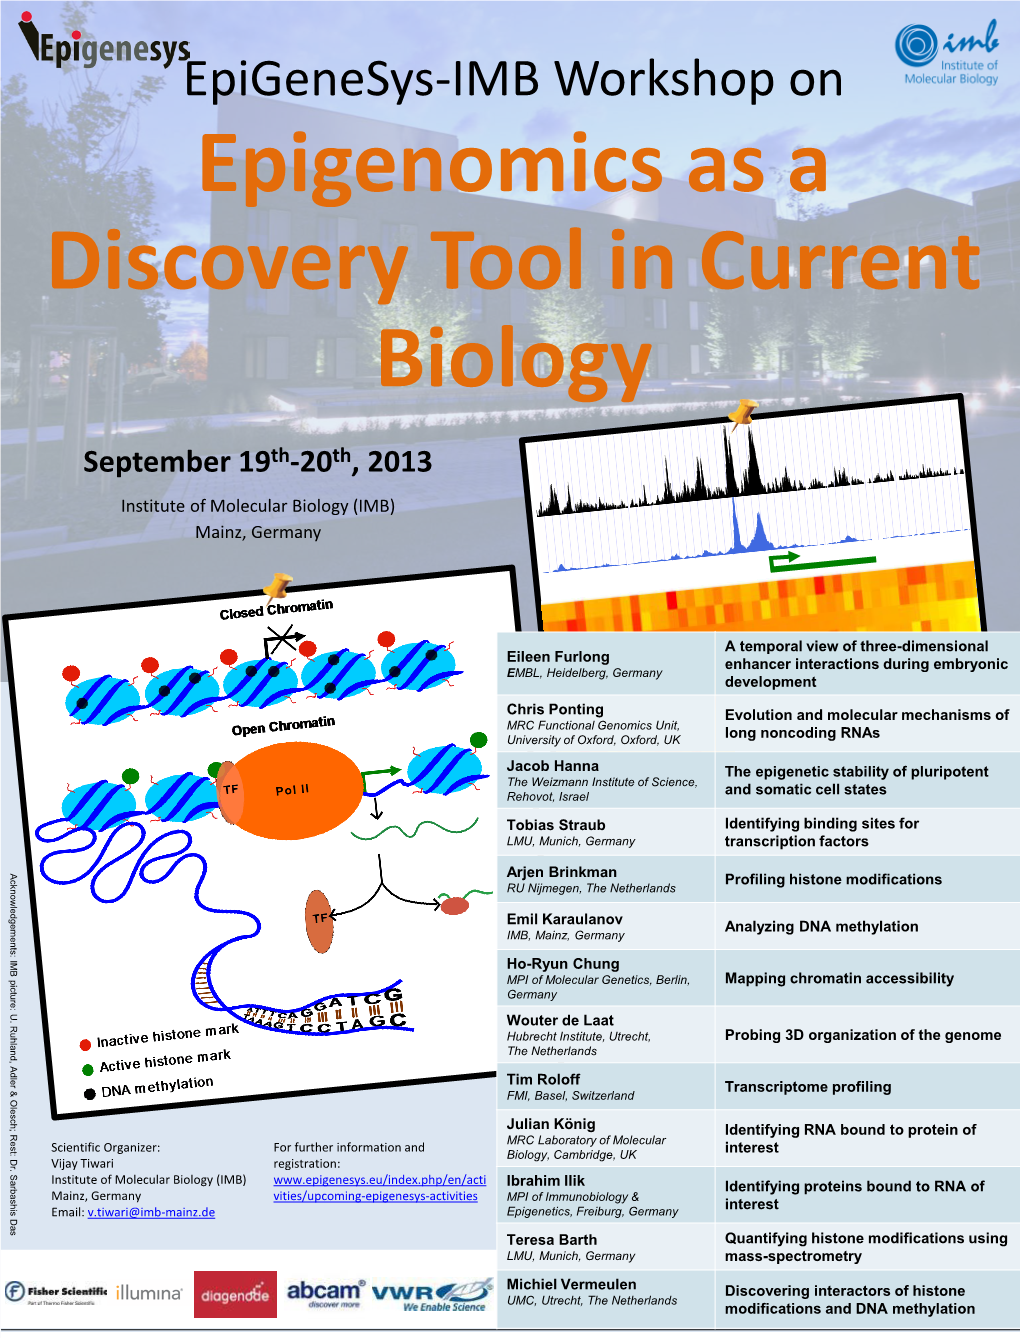 Epigenomics As a Discovery Tool in Current Biology September 19Th-20Th, 2013 Institute of Molecular Biology (IMB) Mainz, Germany